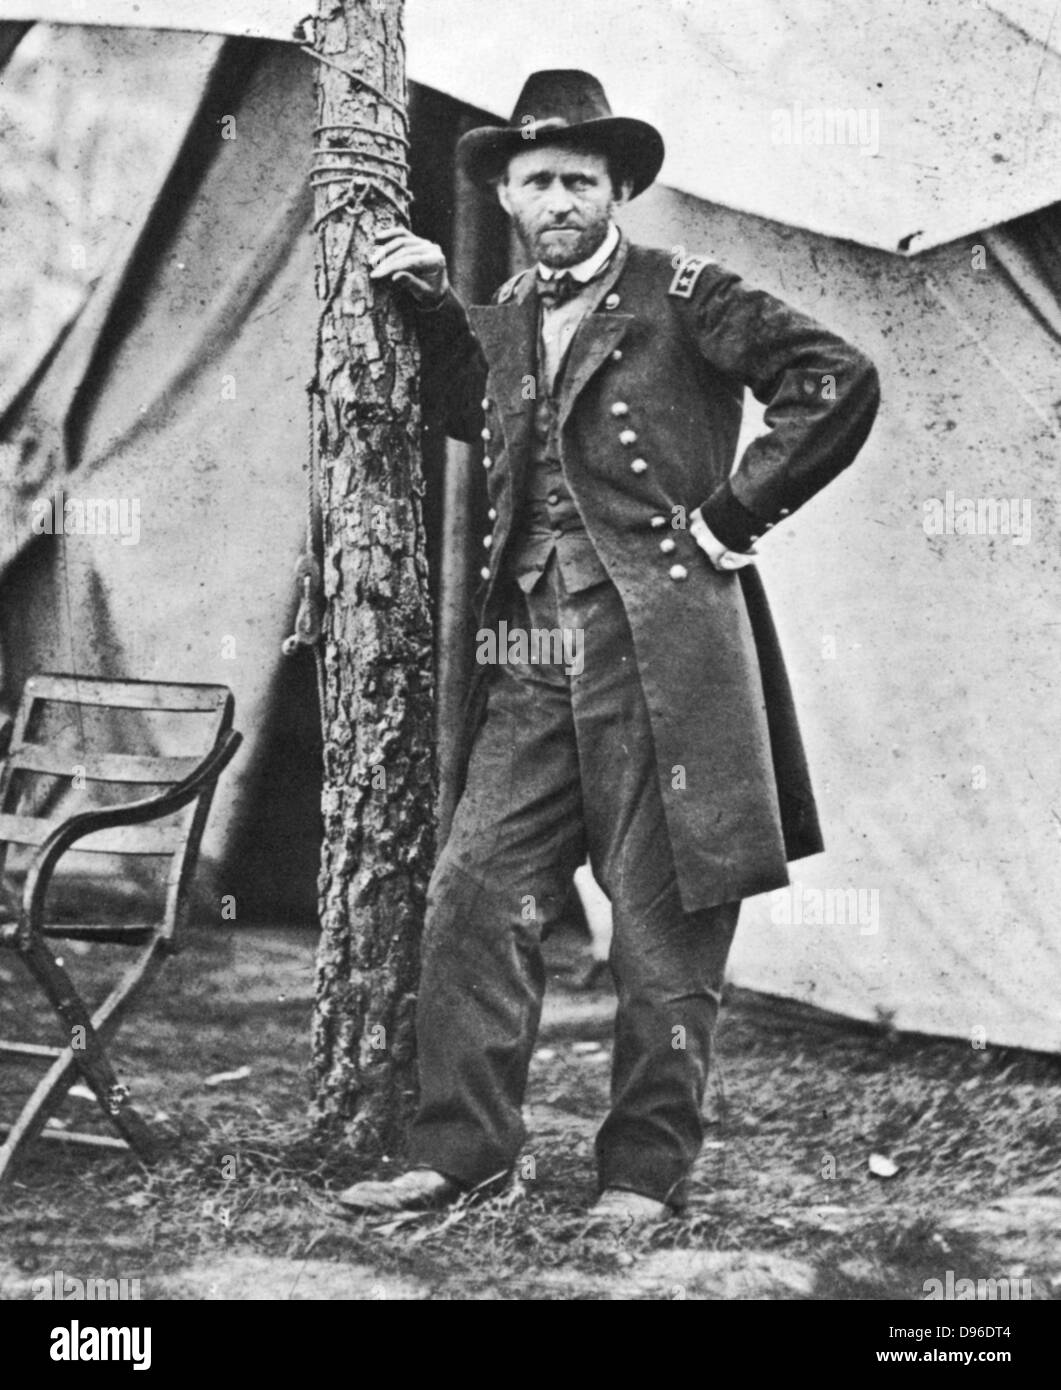 Ulysses Simpson Grant  (1822-1885) born in Marion County, Ohio.  In 1864 he became commanding general of the Federal (Northern) army during the American Civil War. Grant was elected as the 18th In the American Civil War President of the United States in 1869-1877. Stock Photo